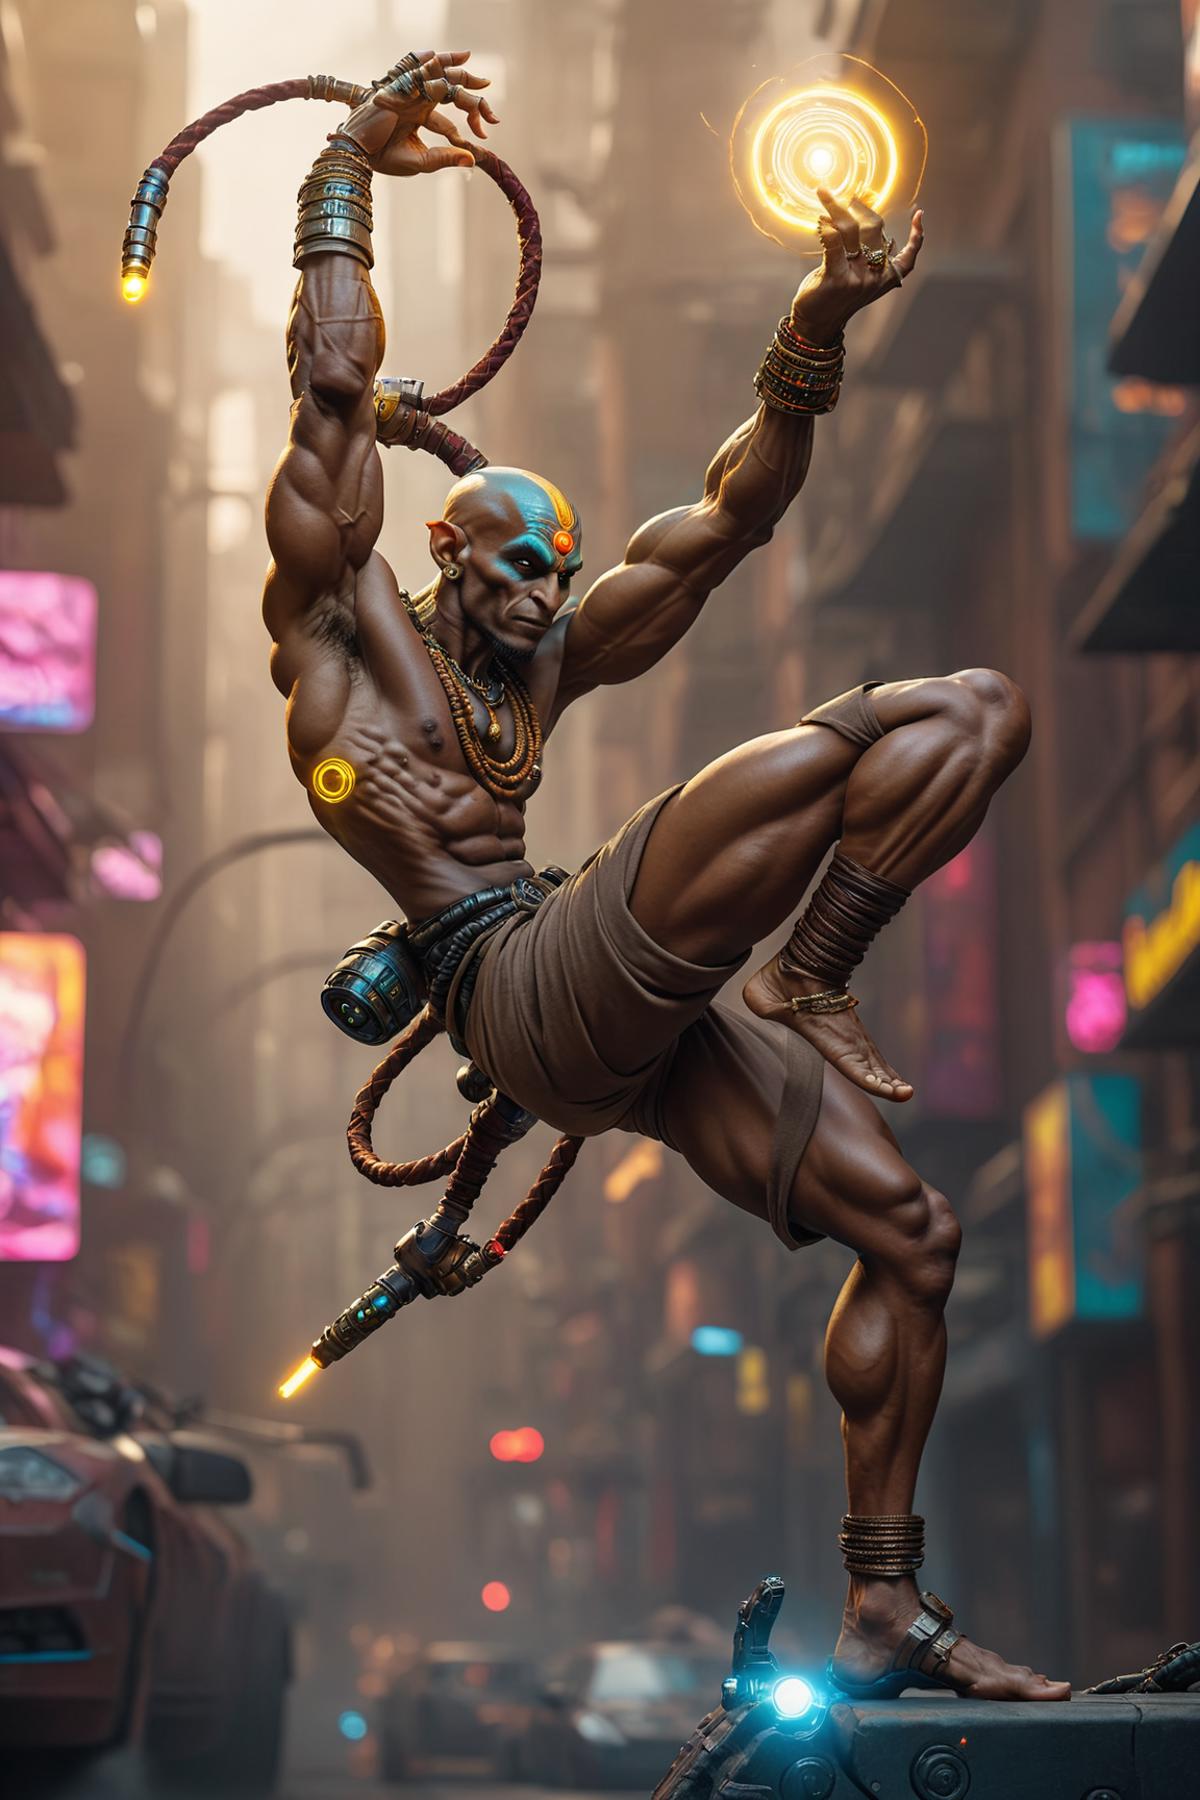 3D animated image of a shirtless man with a blue headband and blue eyes, wearing a brown loincloth, jumping with a rope in his hand.